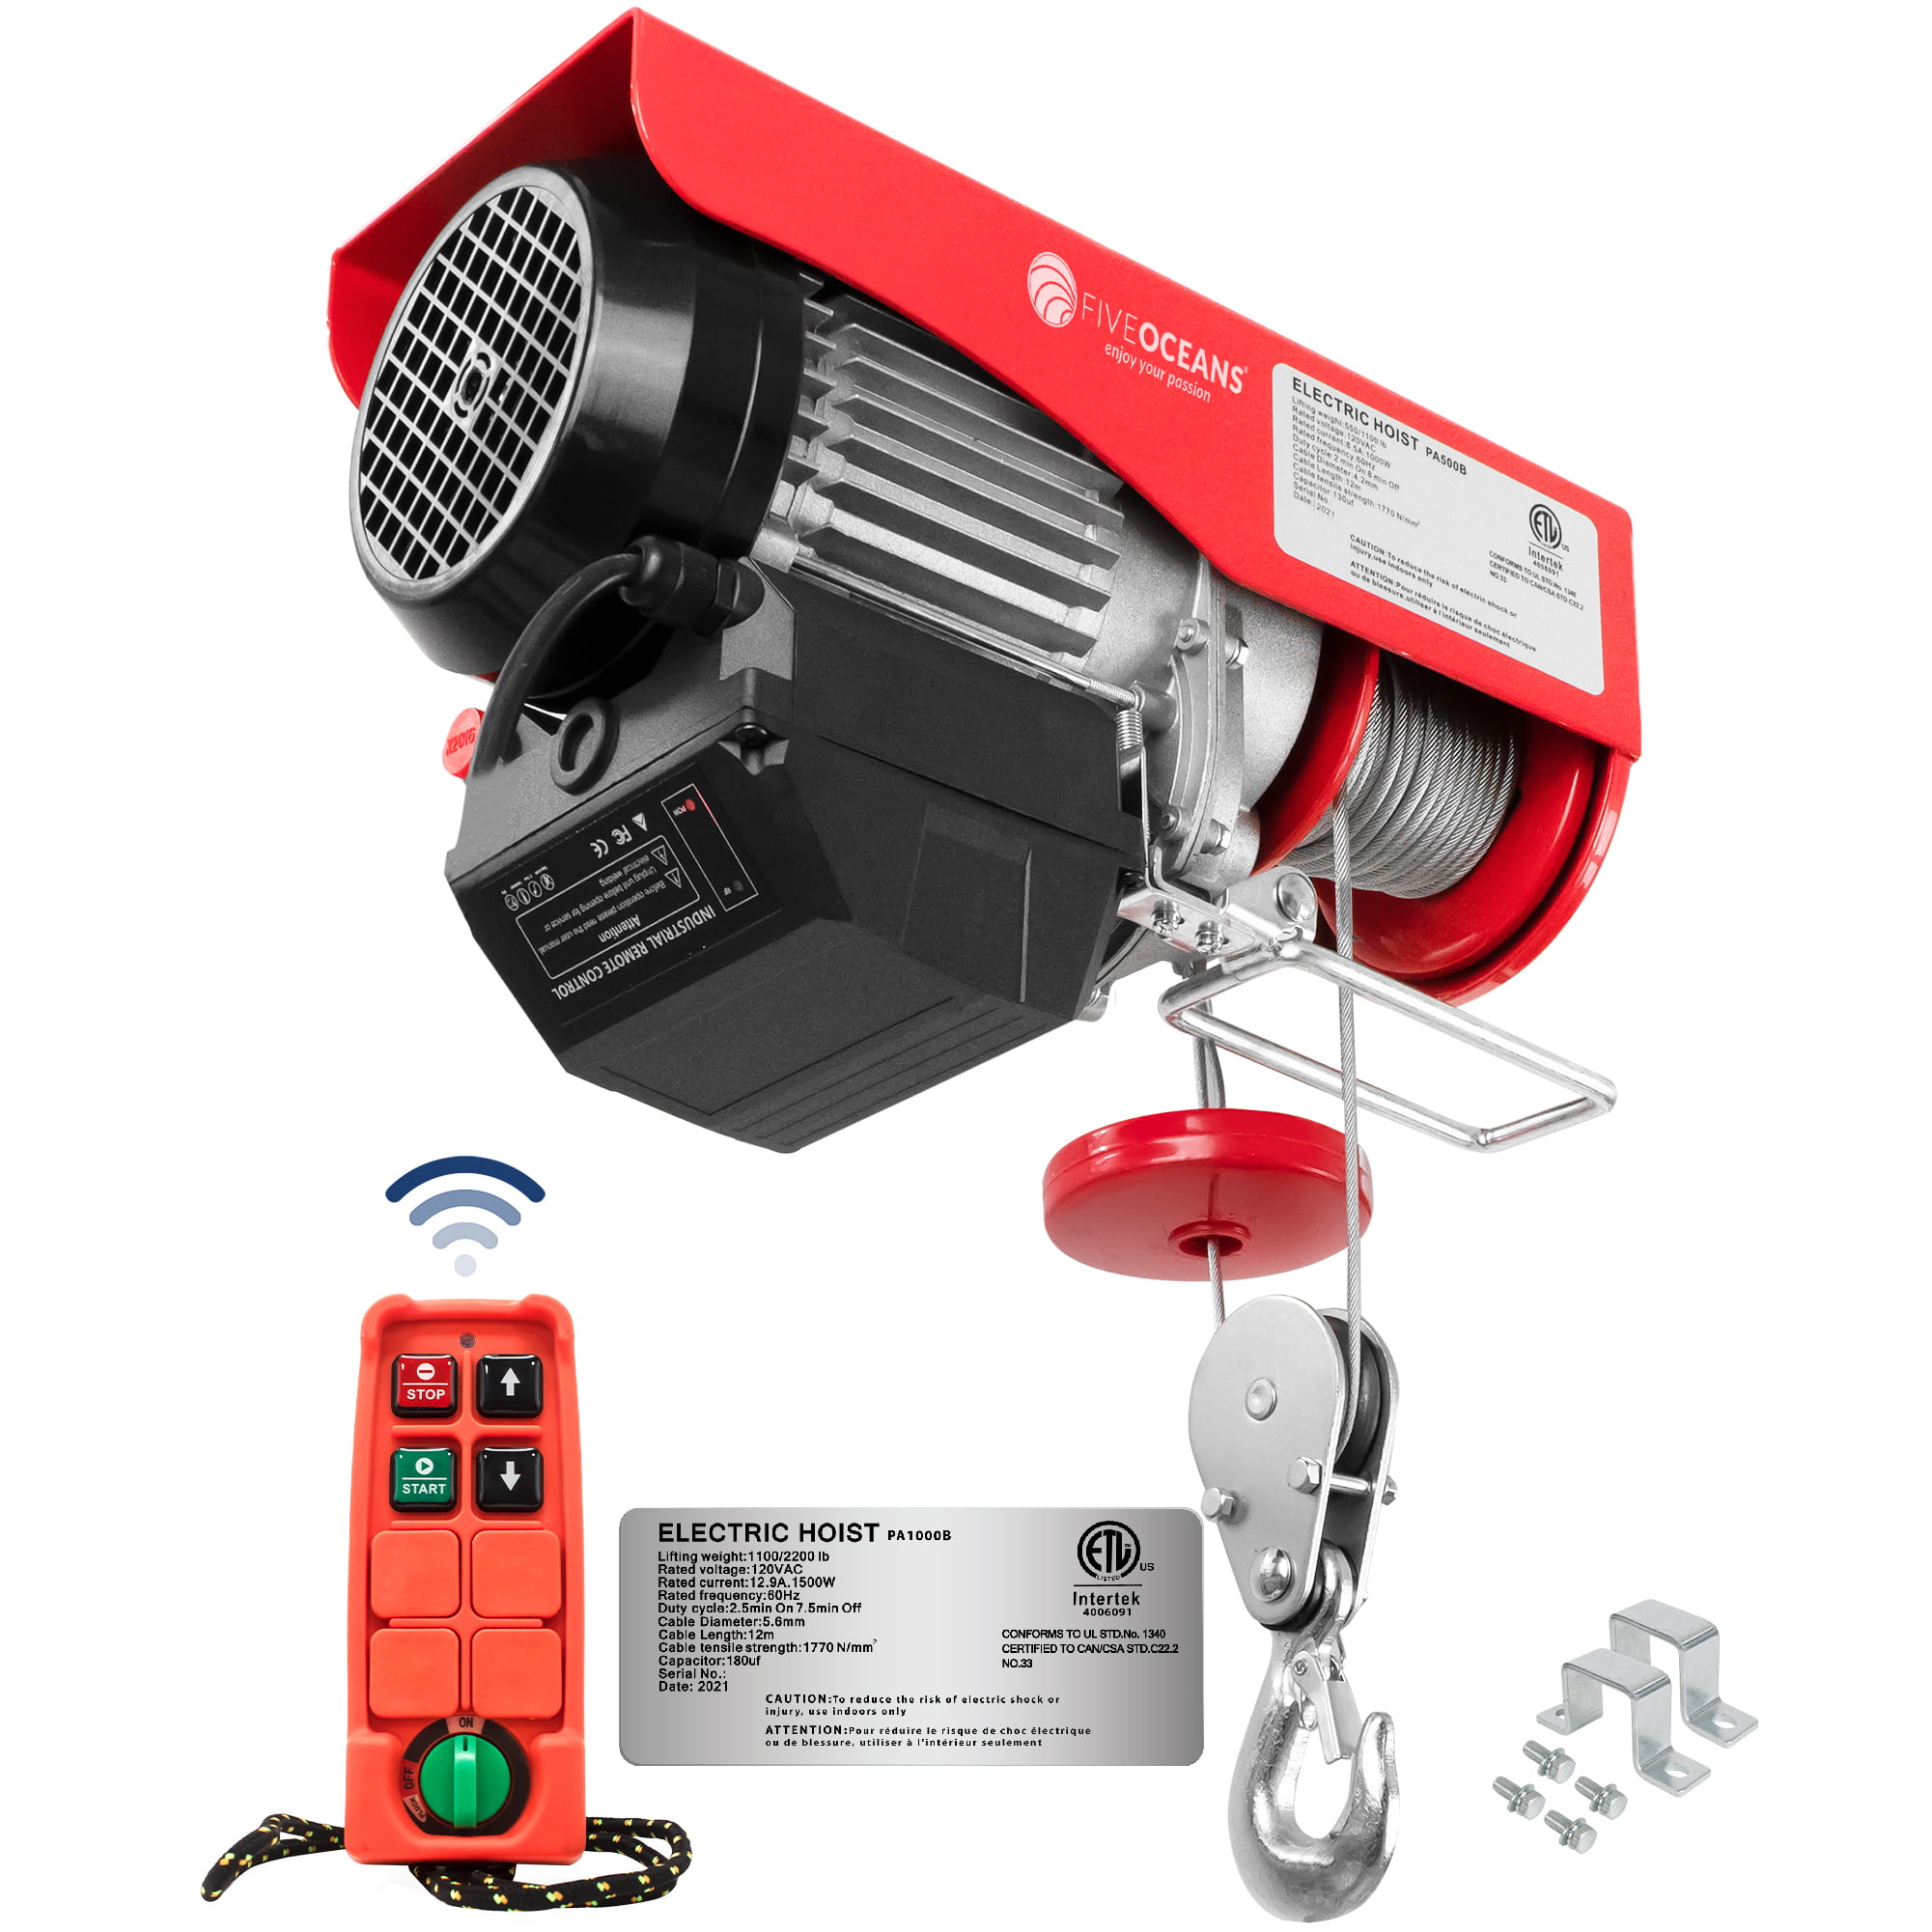 New 440LBS UL Approved Electricw/emergency button USA seller Hoist  Crane